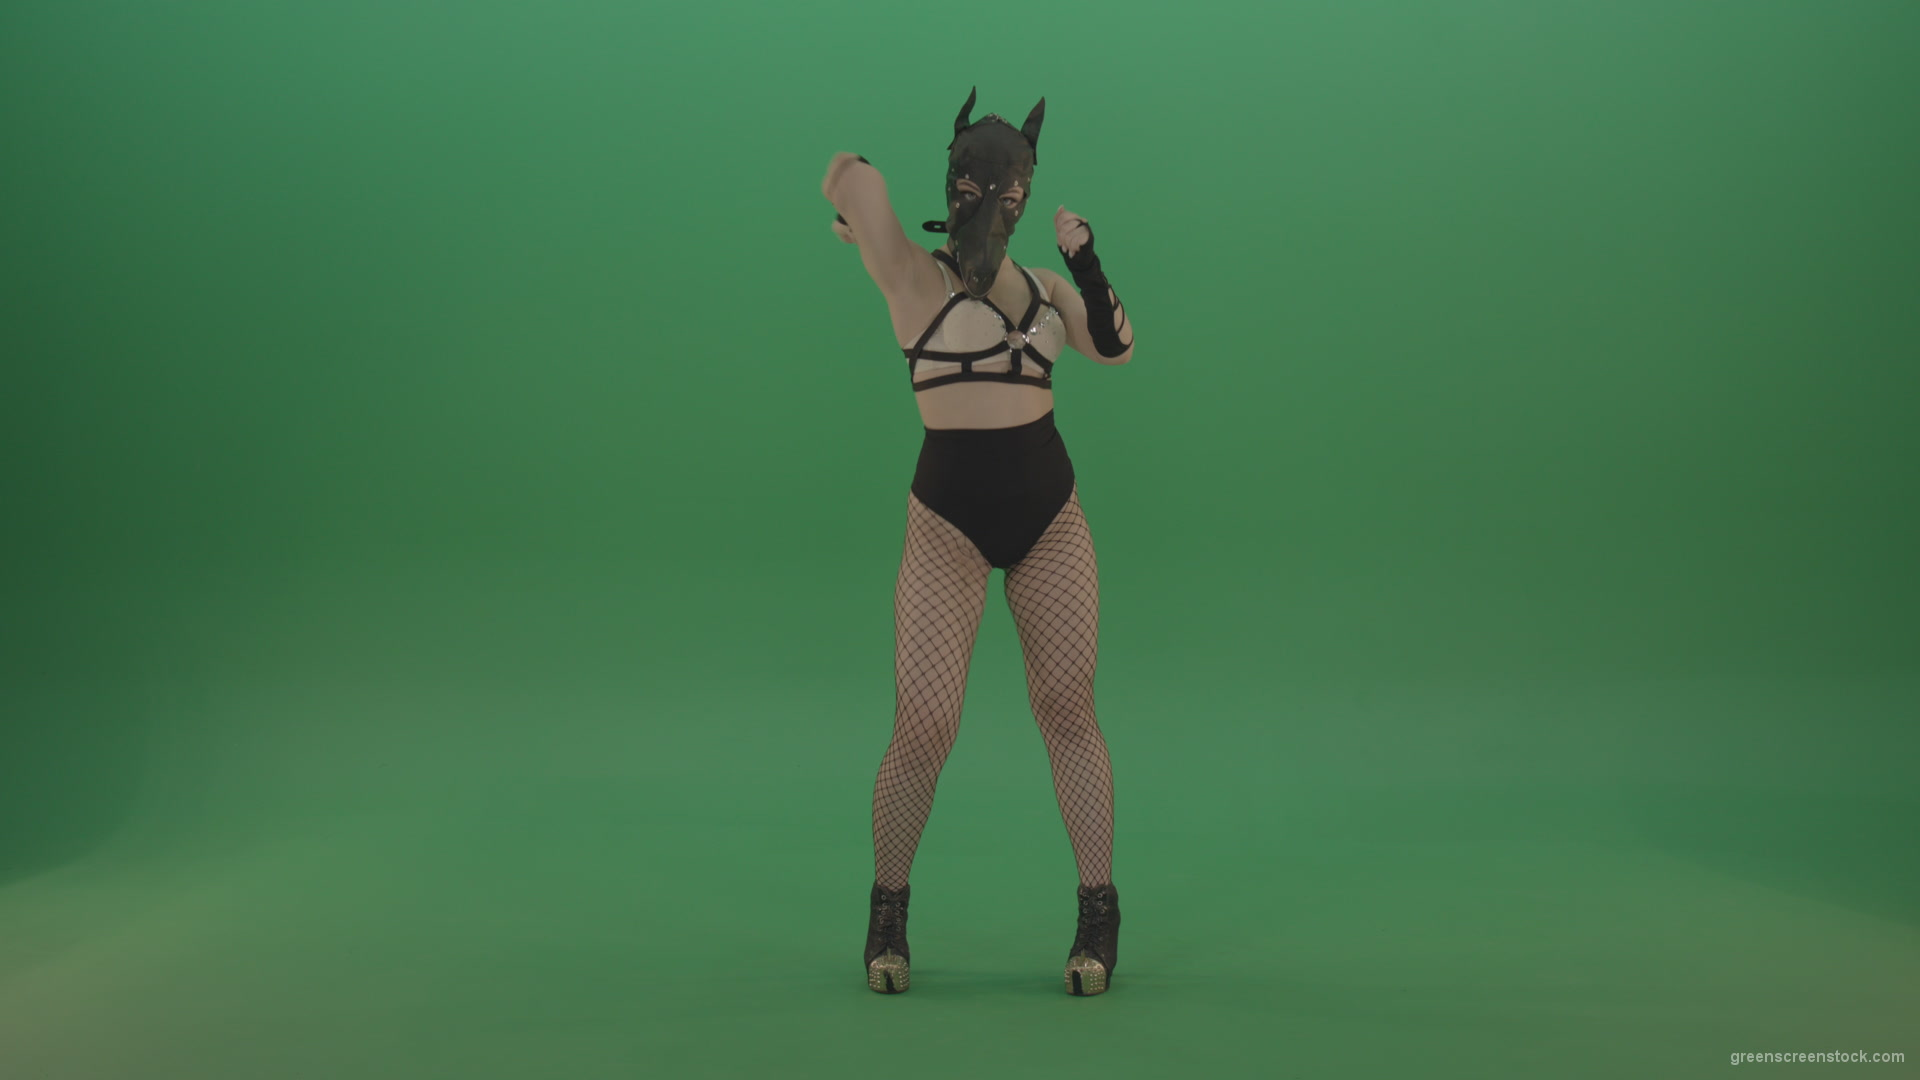 EDM-Girl-in-Wolf-Mask-making-fight-beats-on-green-screen_005 Green Screen Stock